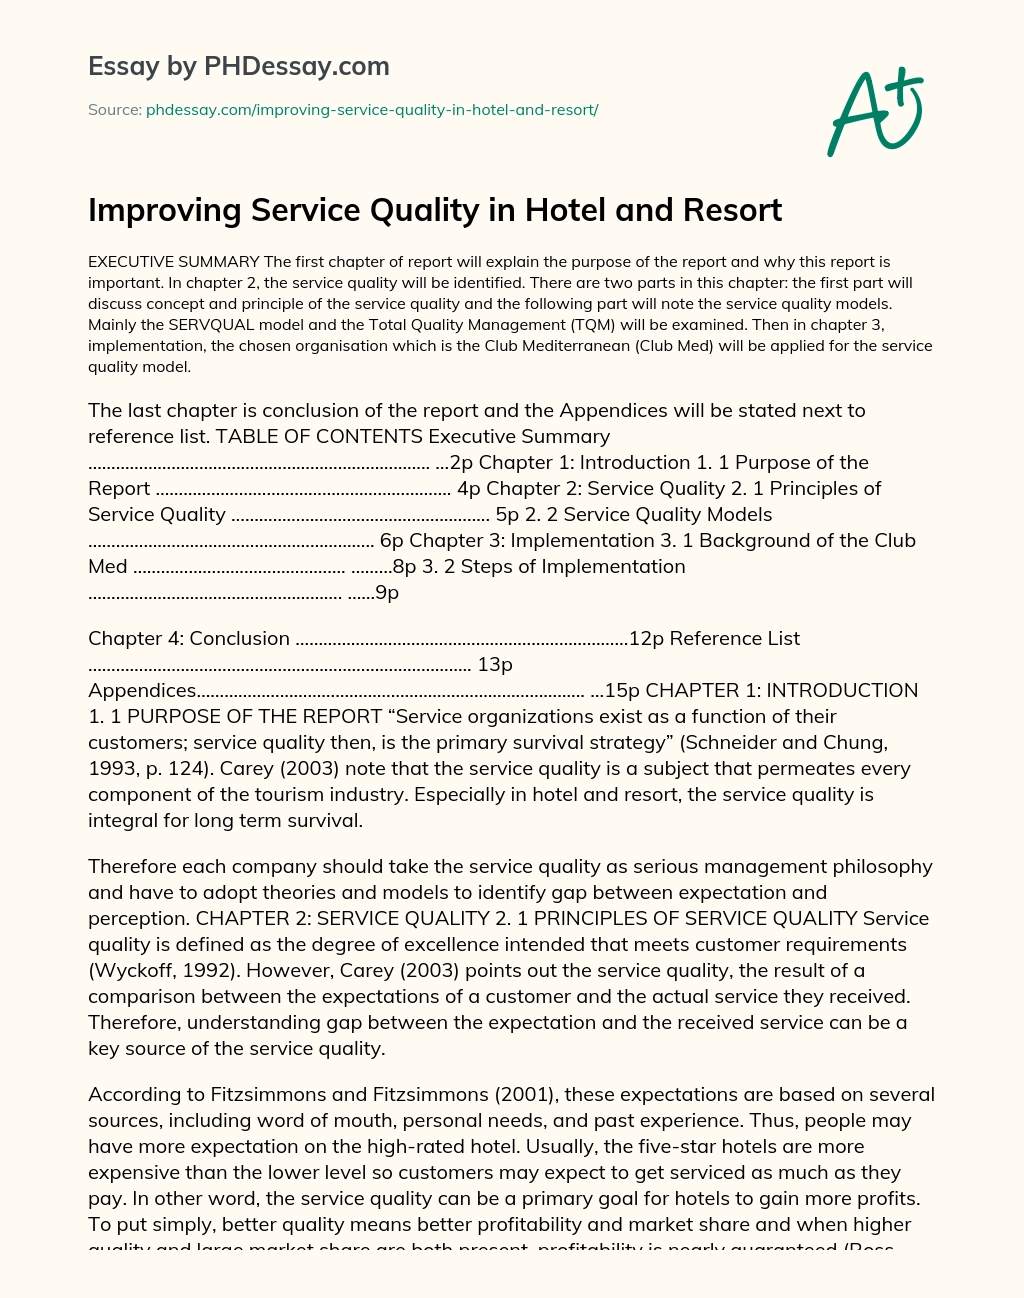 Improving Service Quality in Hotel and Resort essay